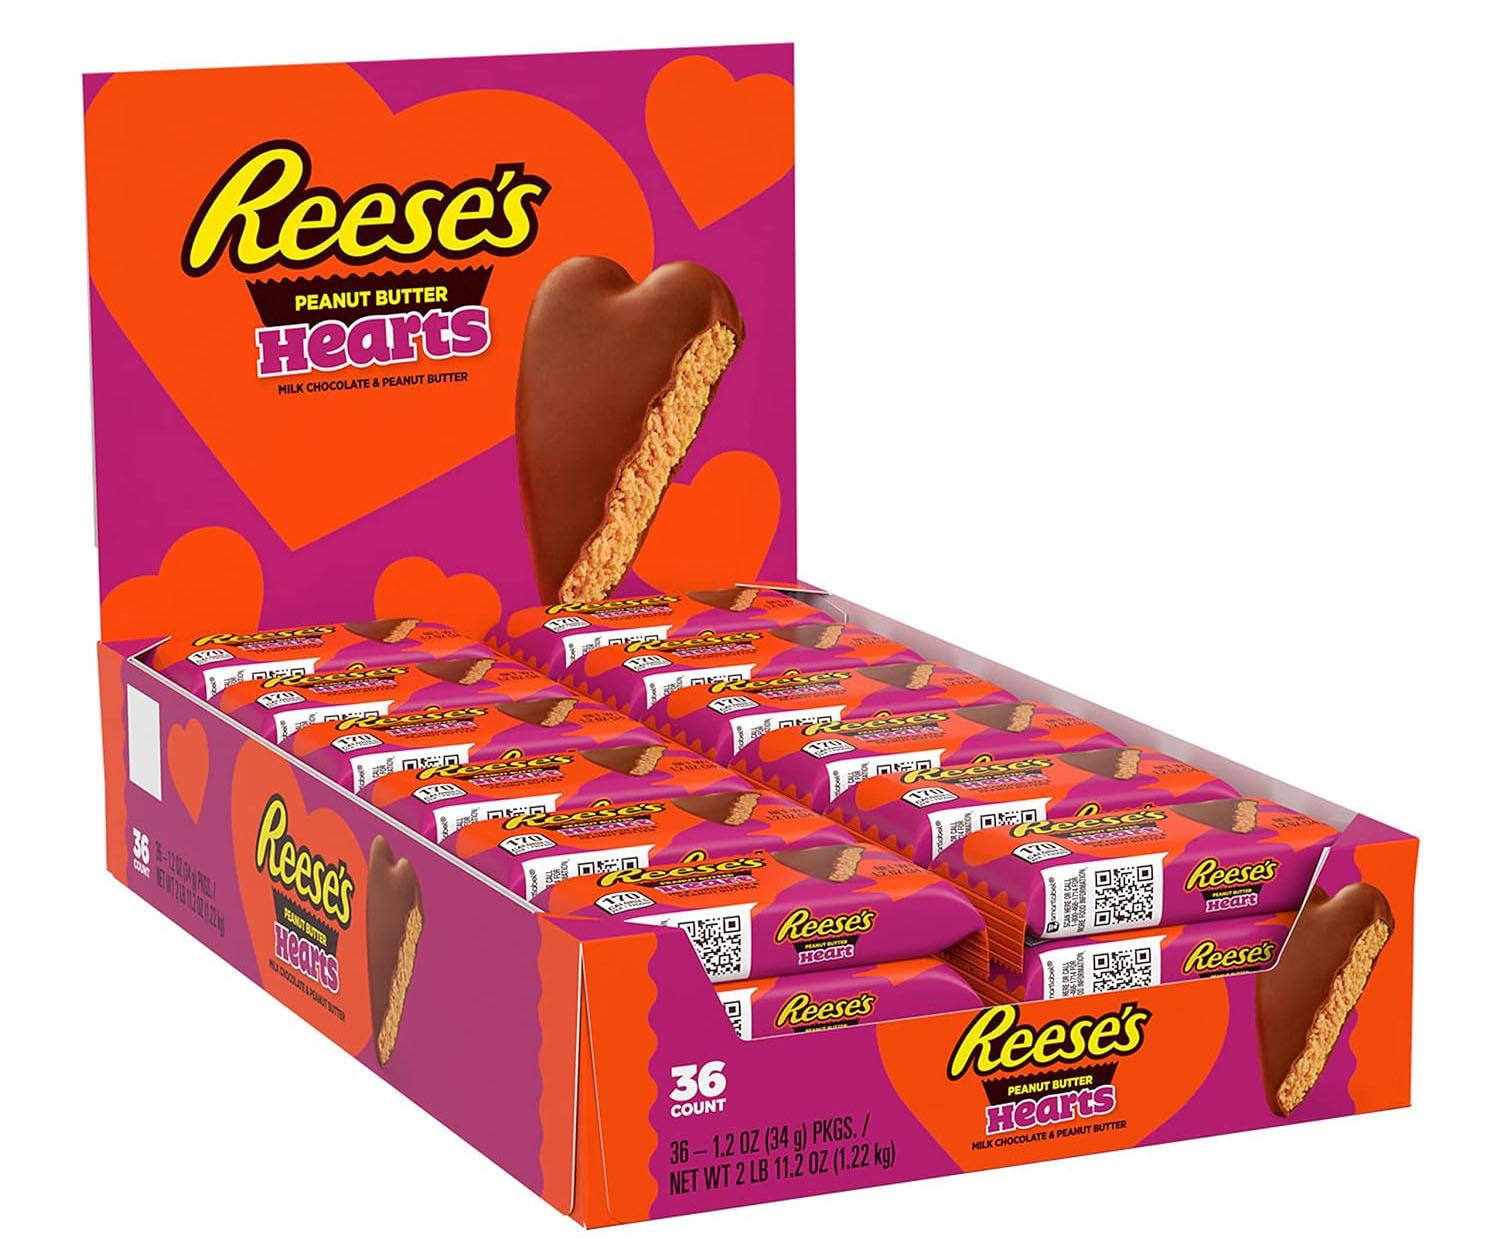 Reeses Milk Chocolate Peanut Butter Hearts 36 Pack for $23.03